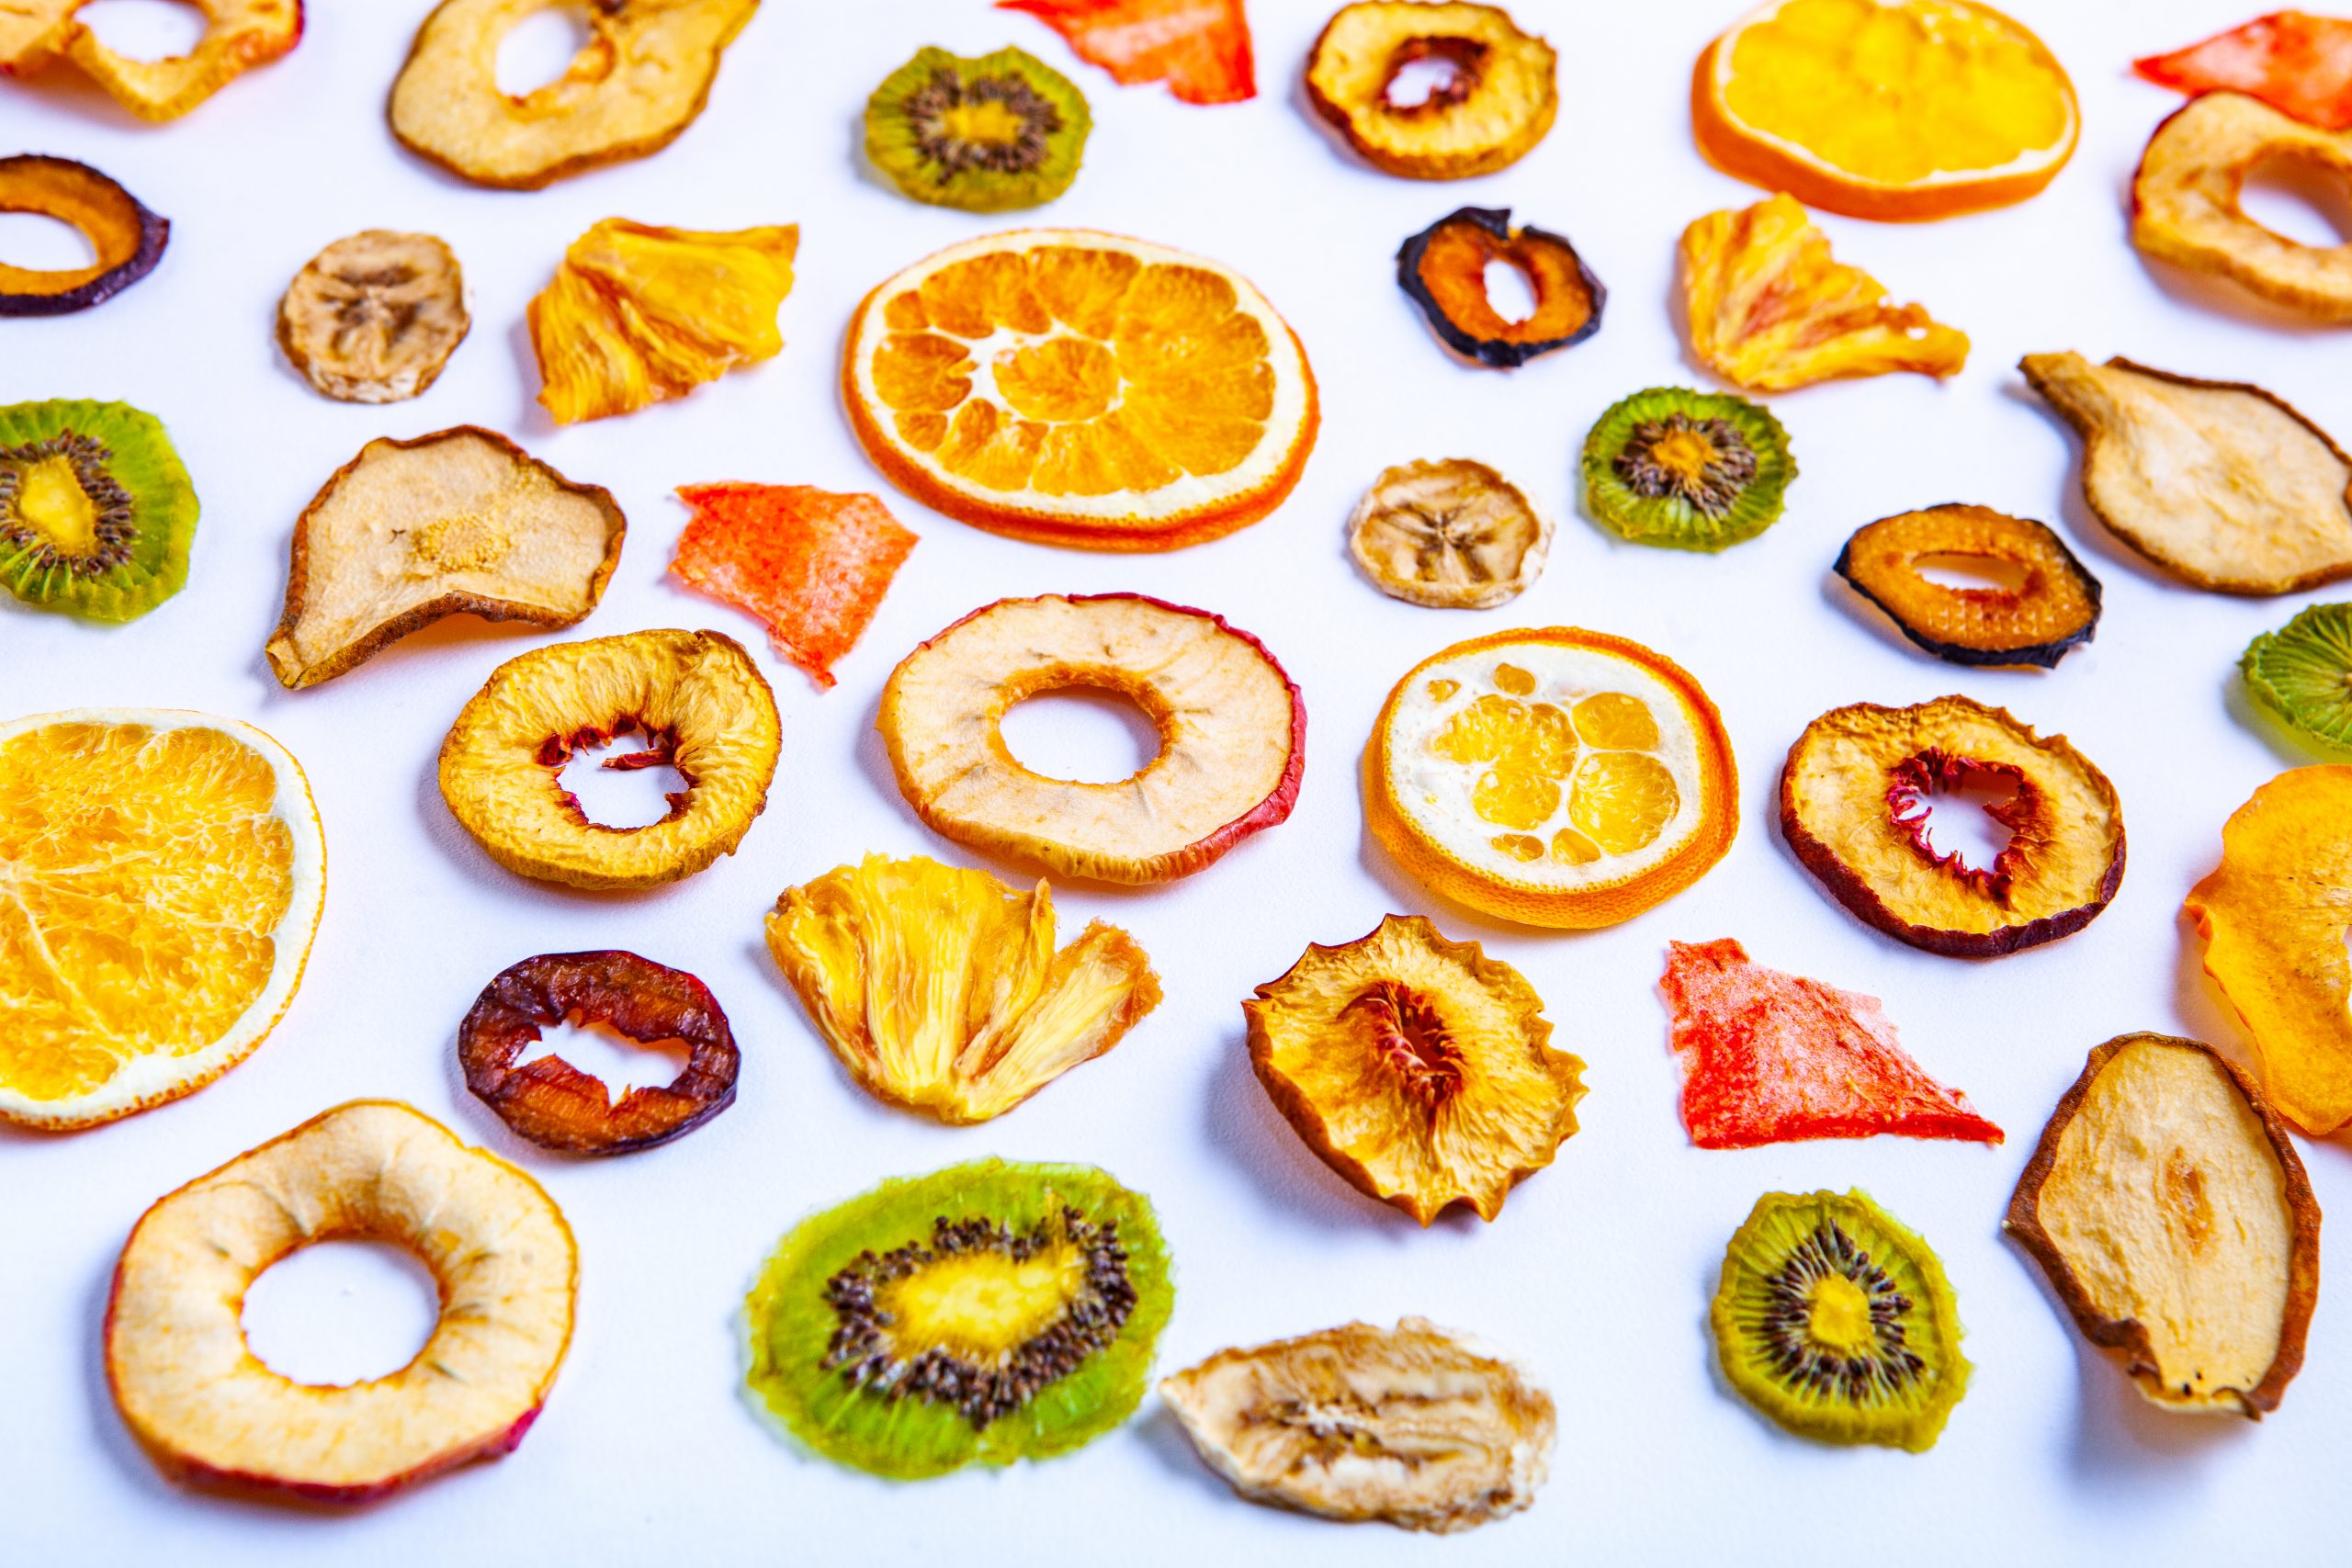 Your guide to dehydrating fruit & vegetables - Luvele AU